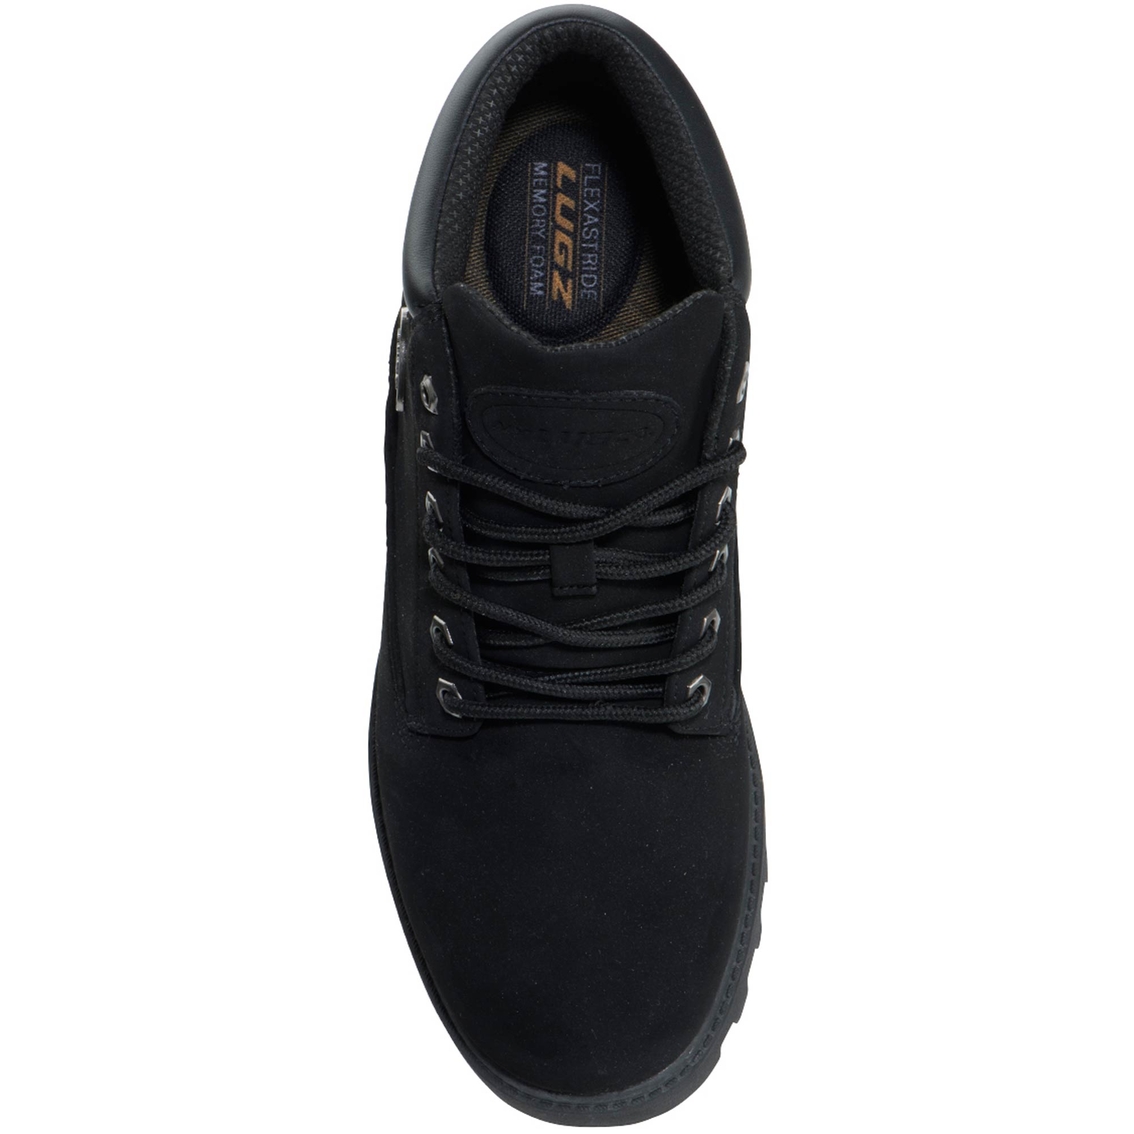 Lugz Men's Empire WR Boots - Image 3 of 4